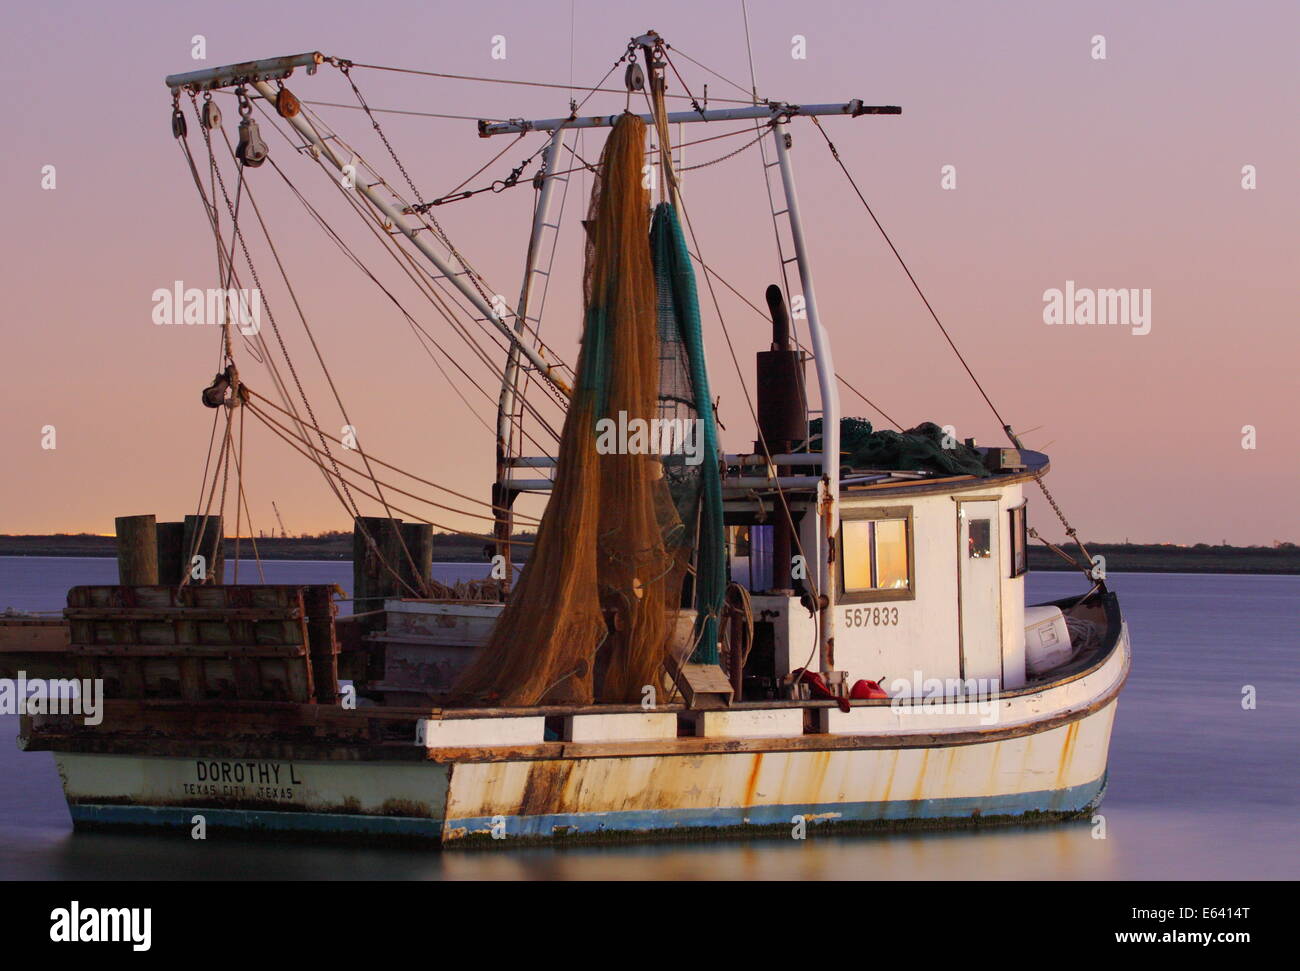 A shrimp boat (trawler) at rest on a tranquil bay in Texas, USA. Stock Photo